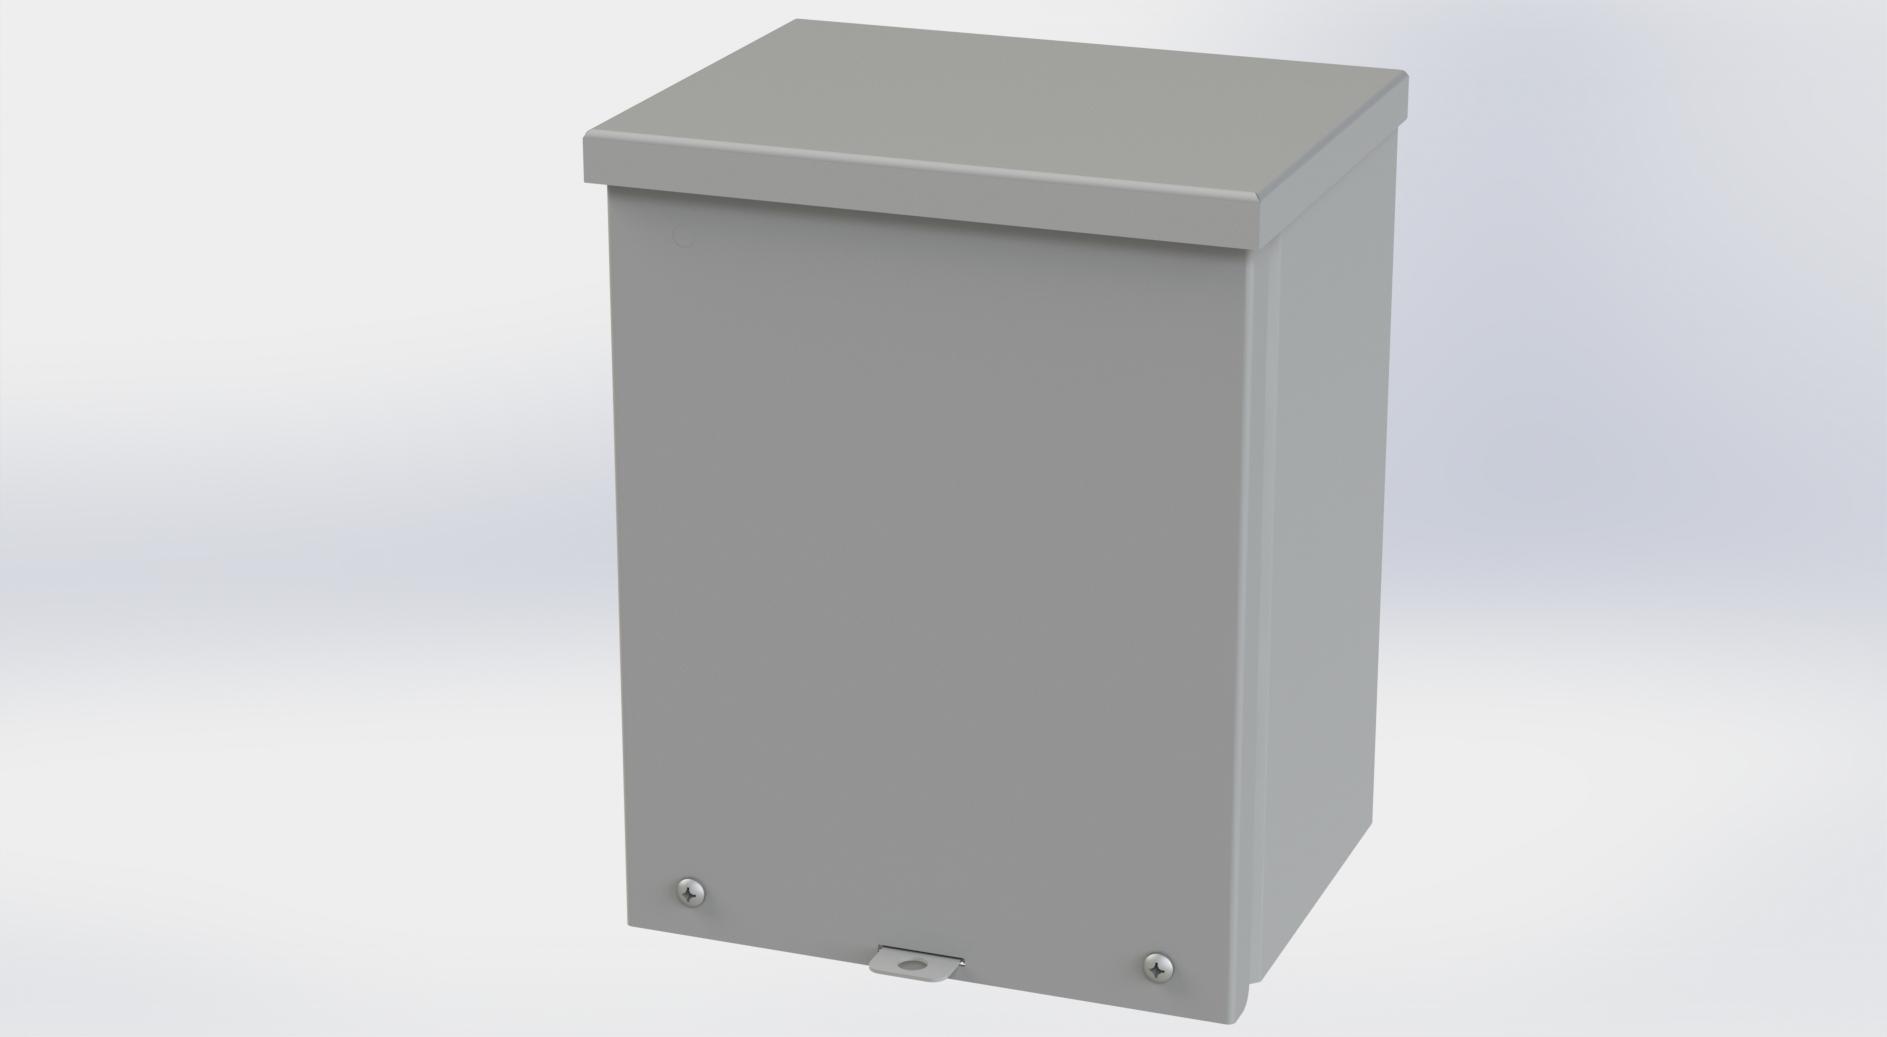 Saginaw Control SCE-10R86 Type-3R Screw Cover Enclosure, Height:10.00", Width:8.00", Depth:6.00", ANSI-61 gray powder coating inside and out.